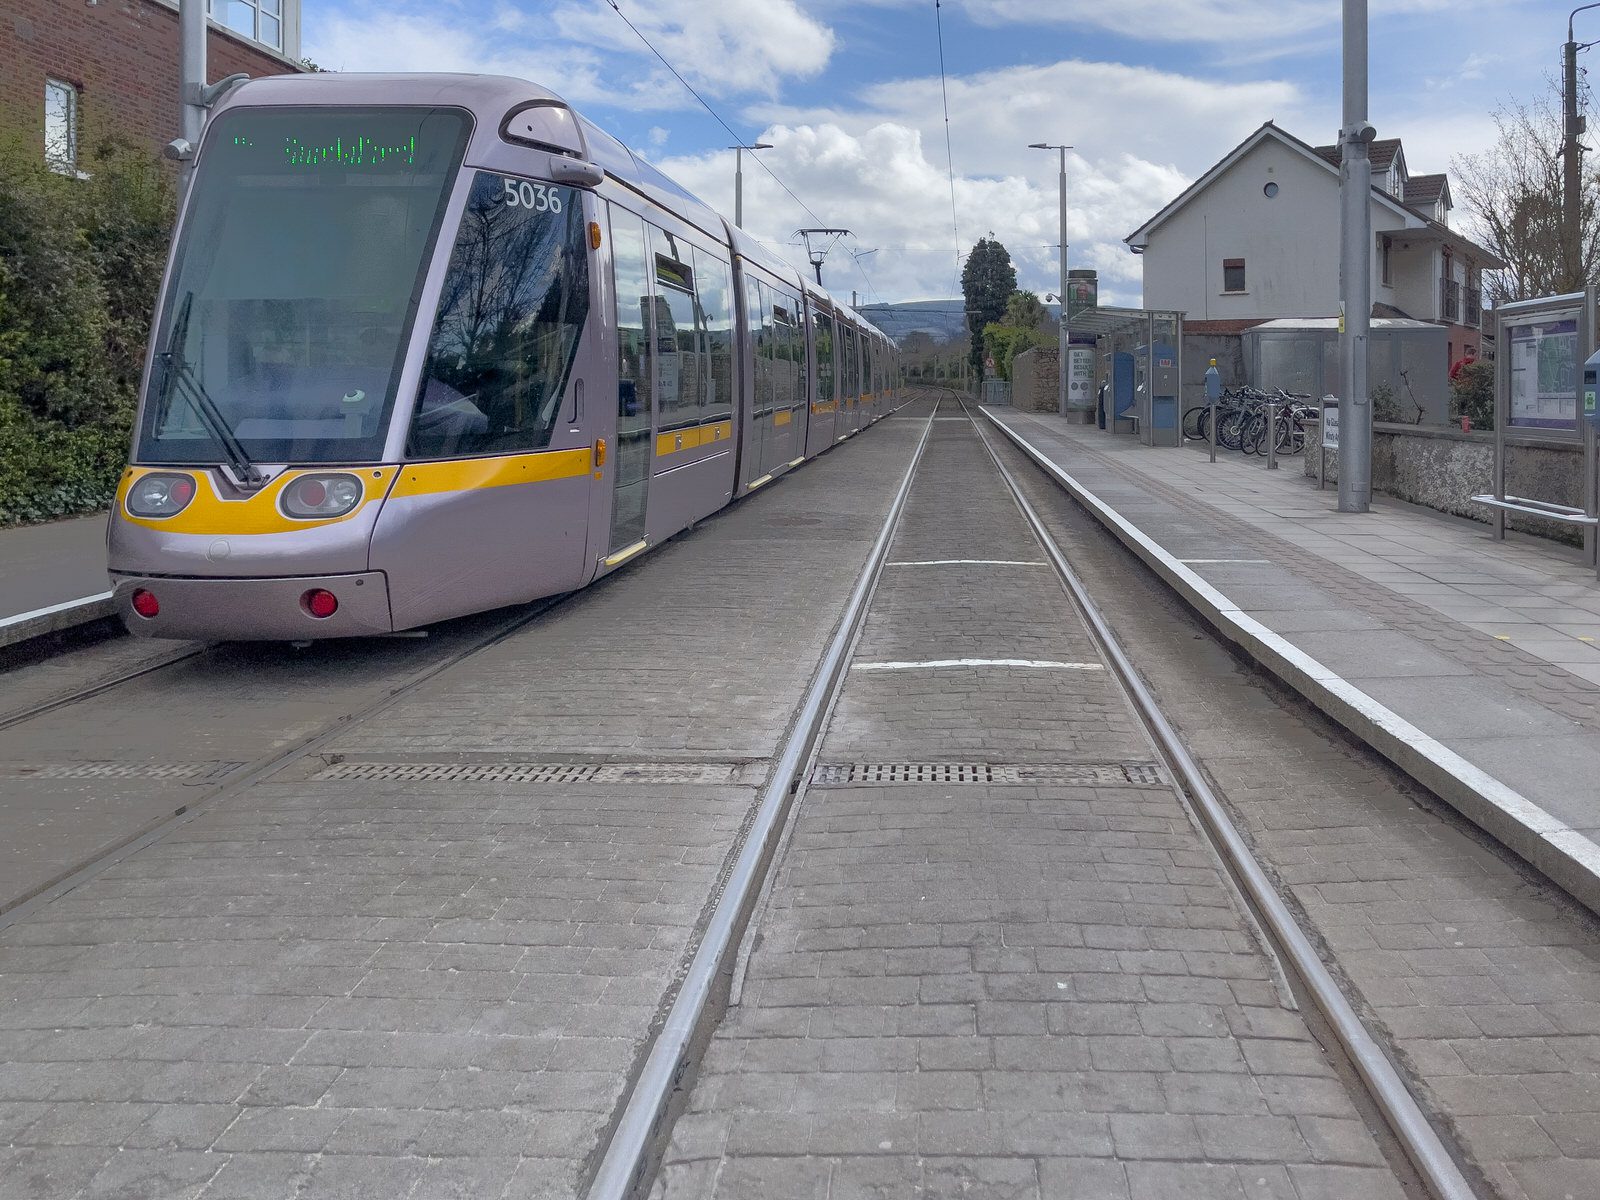 THE LUAS TRAM STOP AT WINDY ARBOUR AND THE IMMEDIATE AREA 025